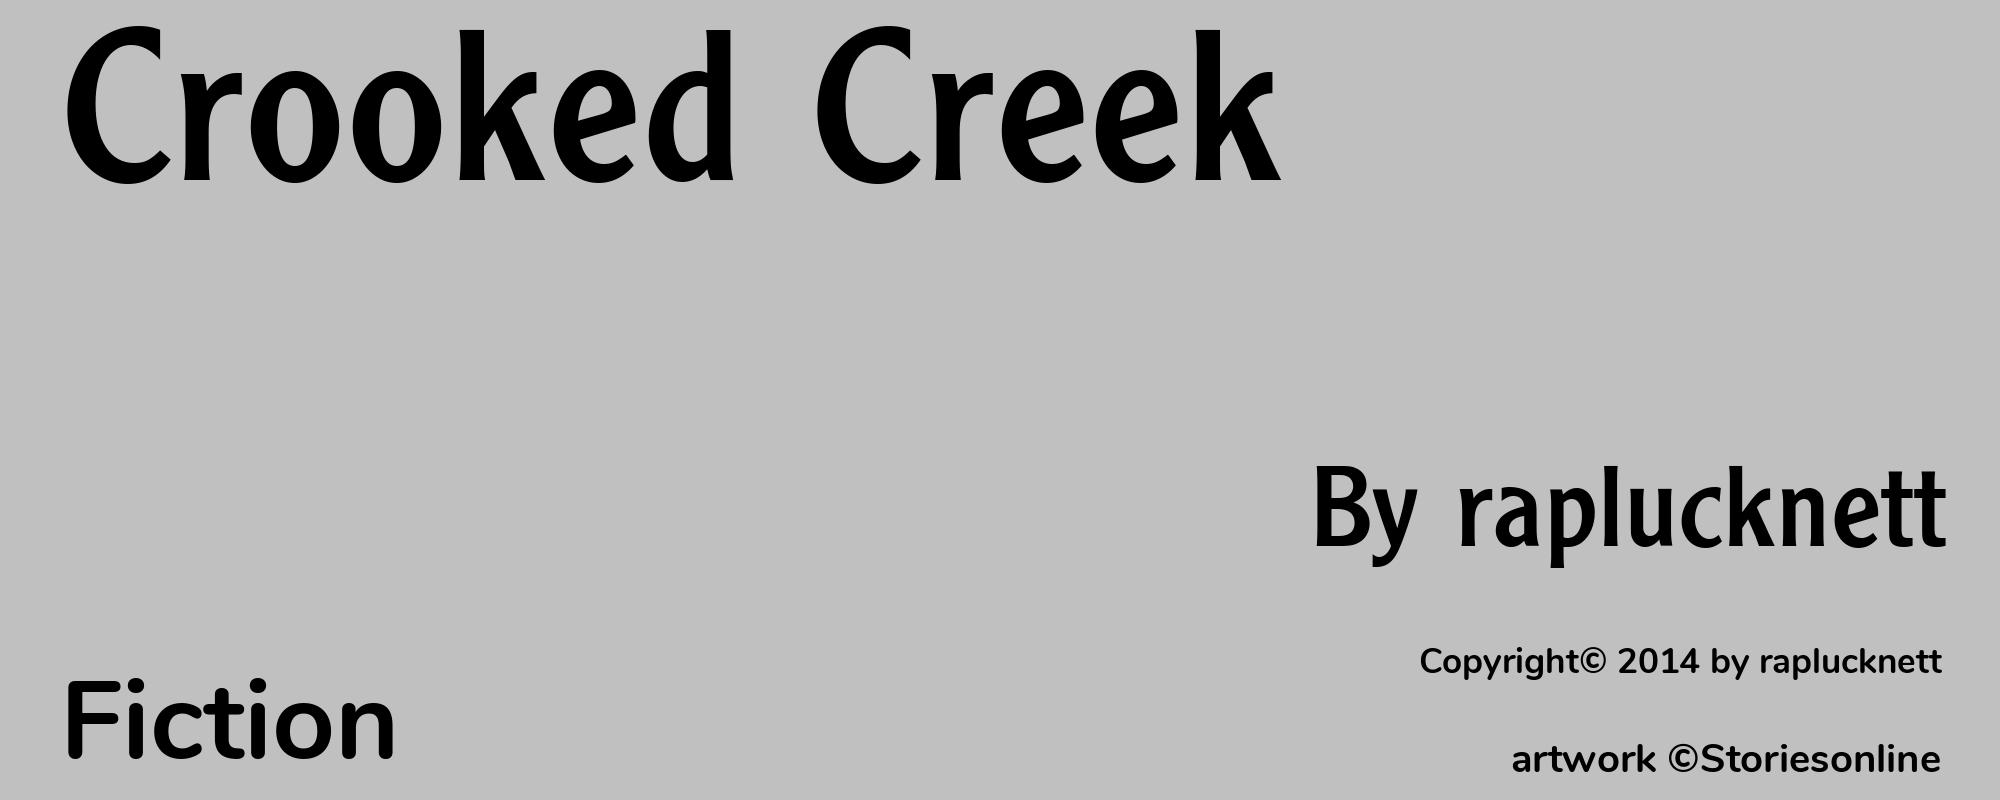 Crooked Creek - Cover